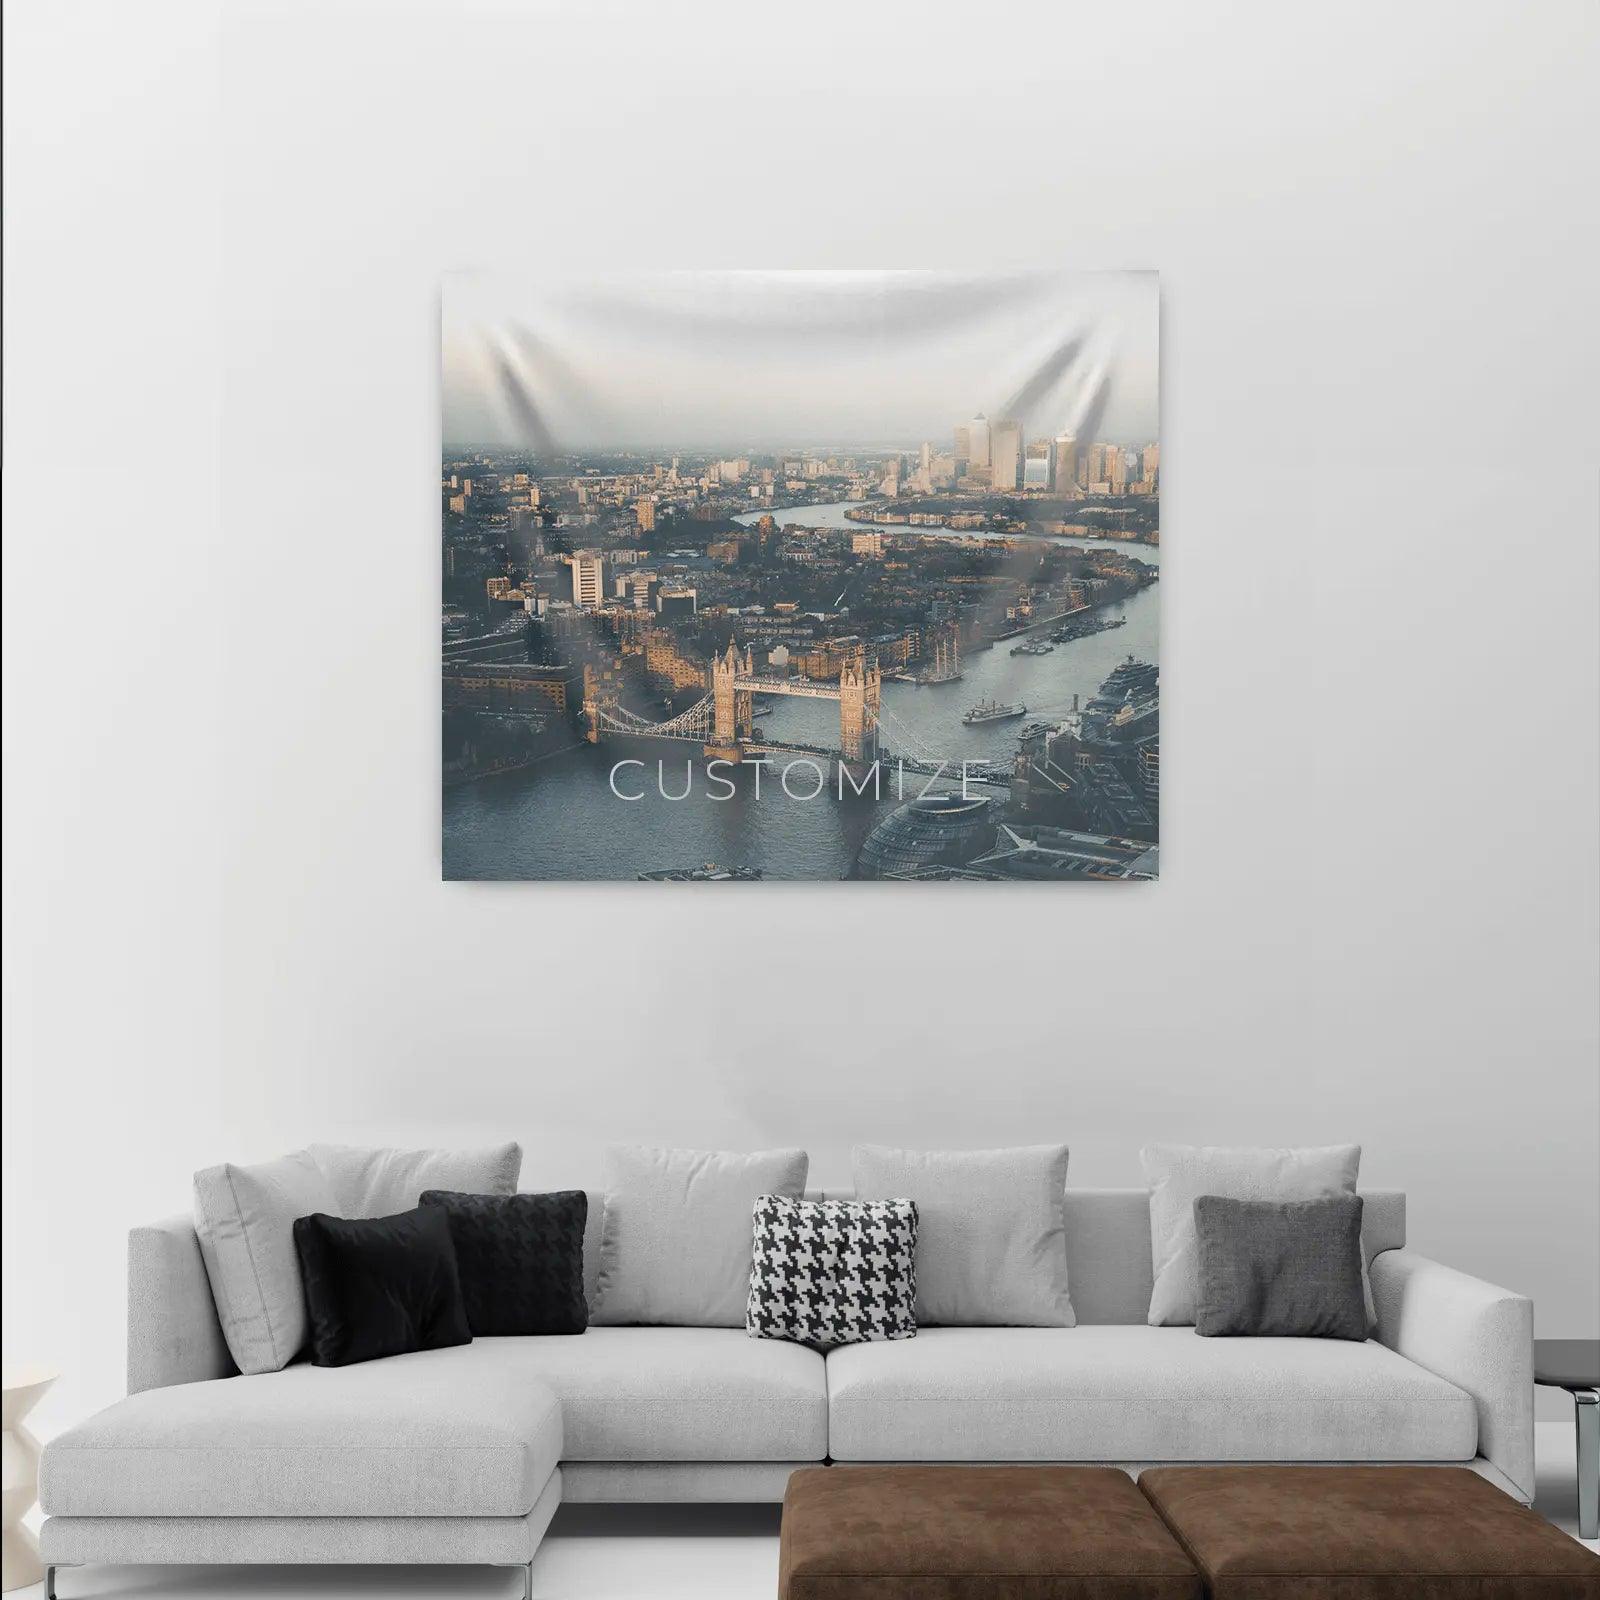 Wall Tapestry Tapestry 51-x-60-Horizontal 44.95 Qstomize.com